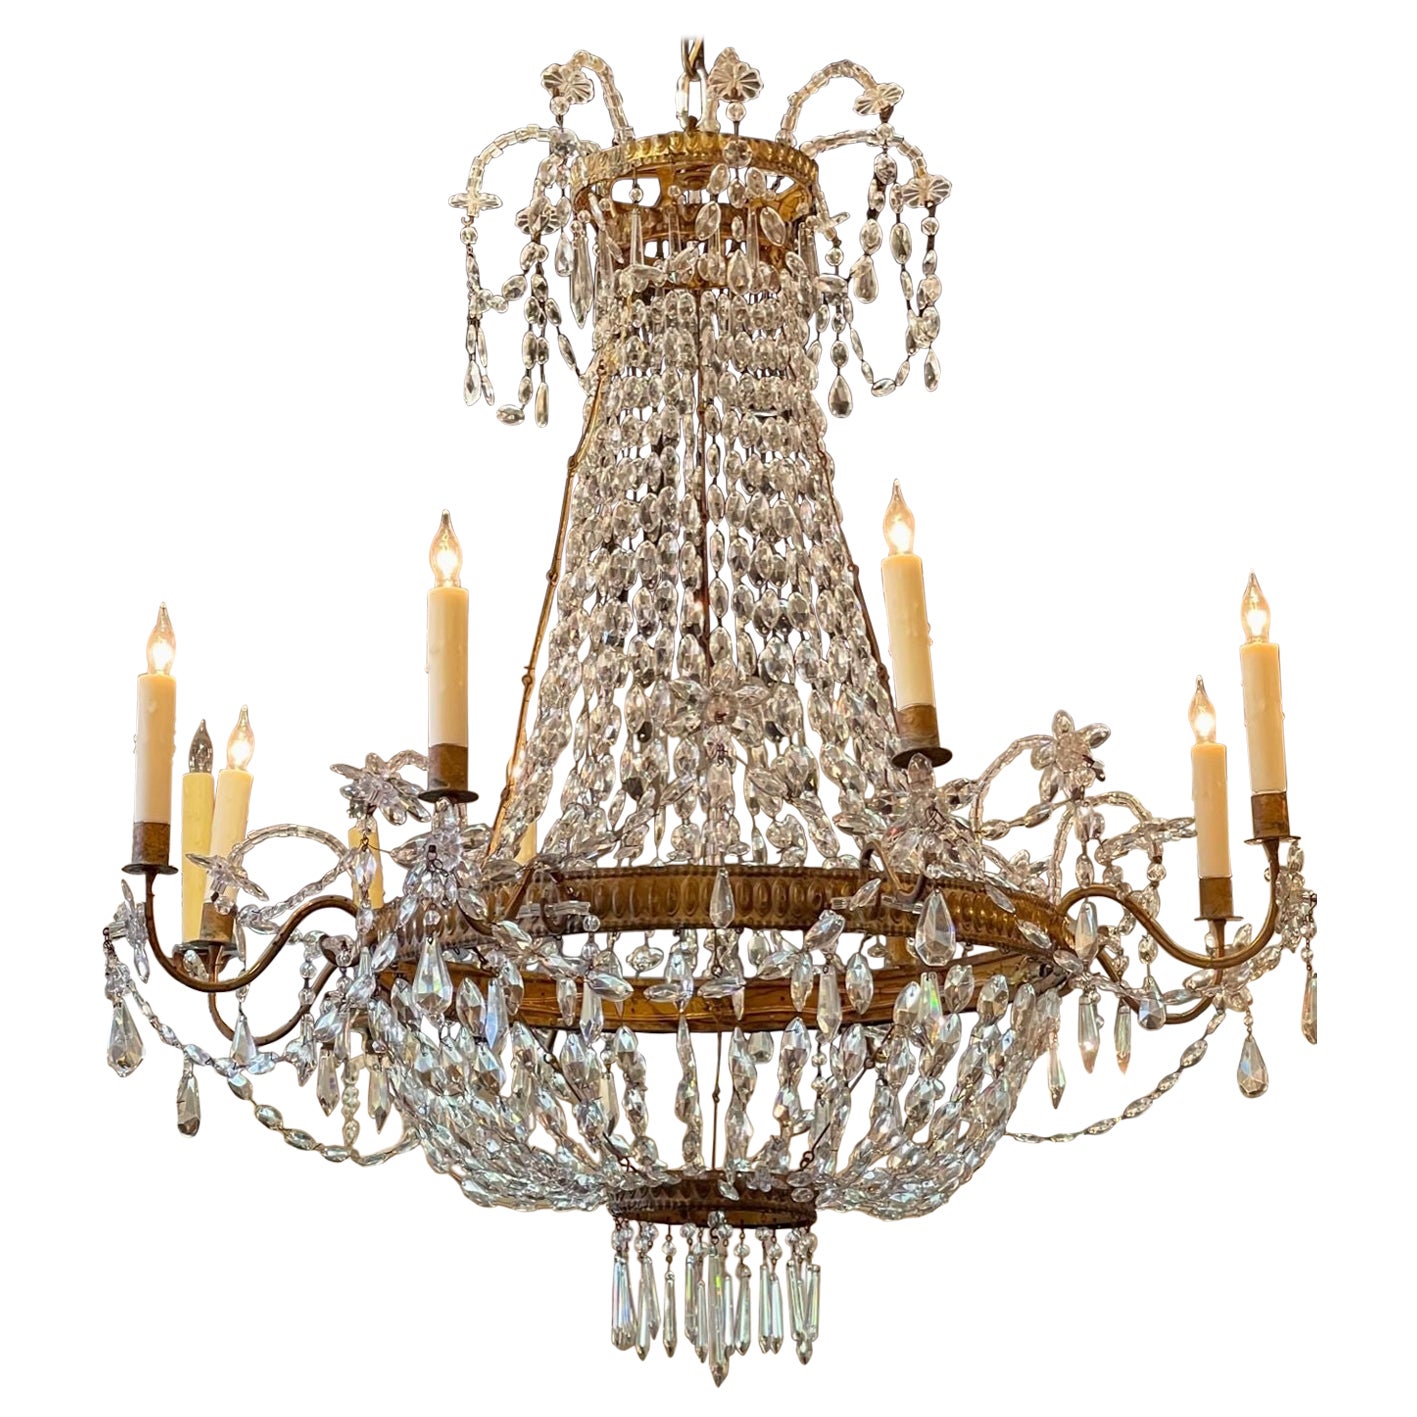 18th Century Italian Gilt Brass and Crystal Chandeliers For Sale